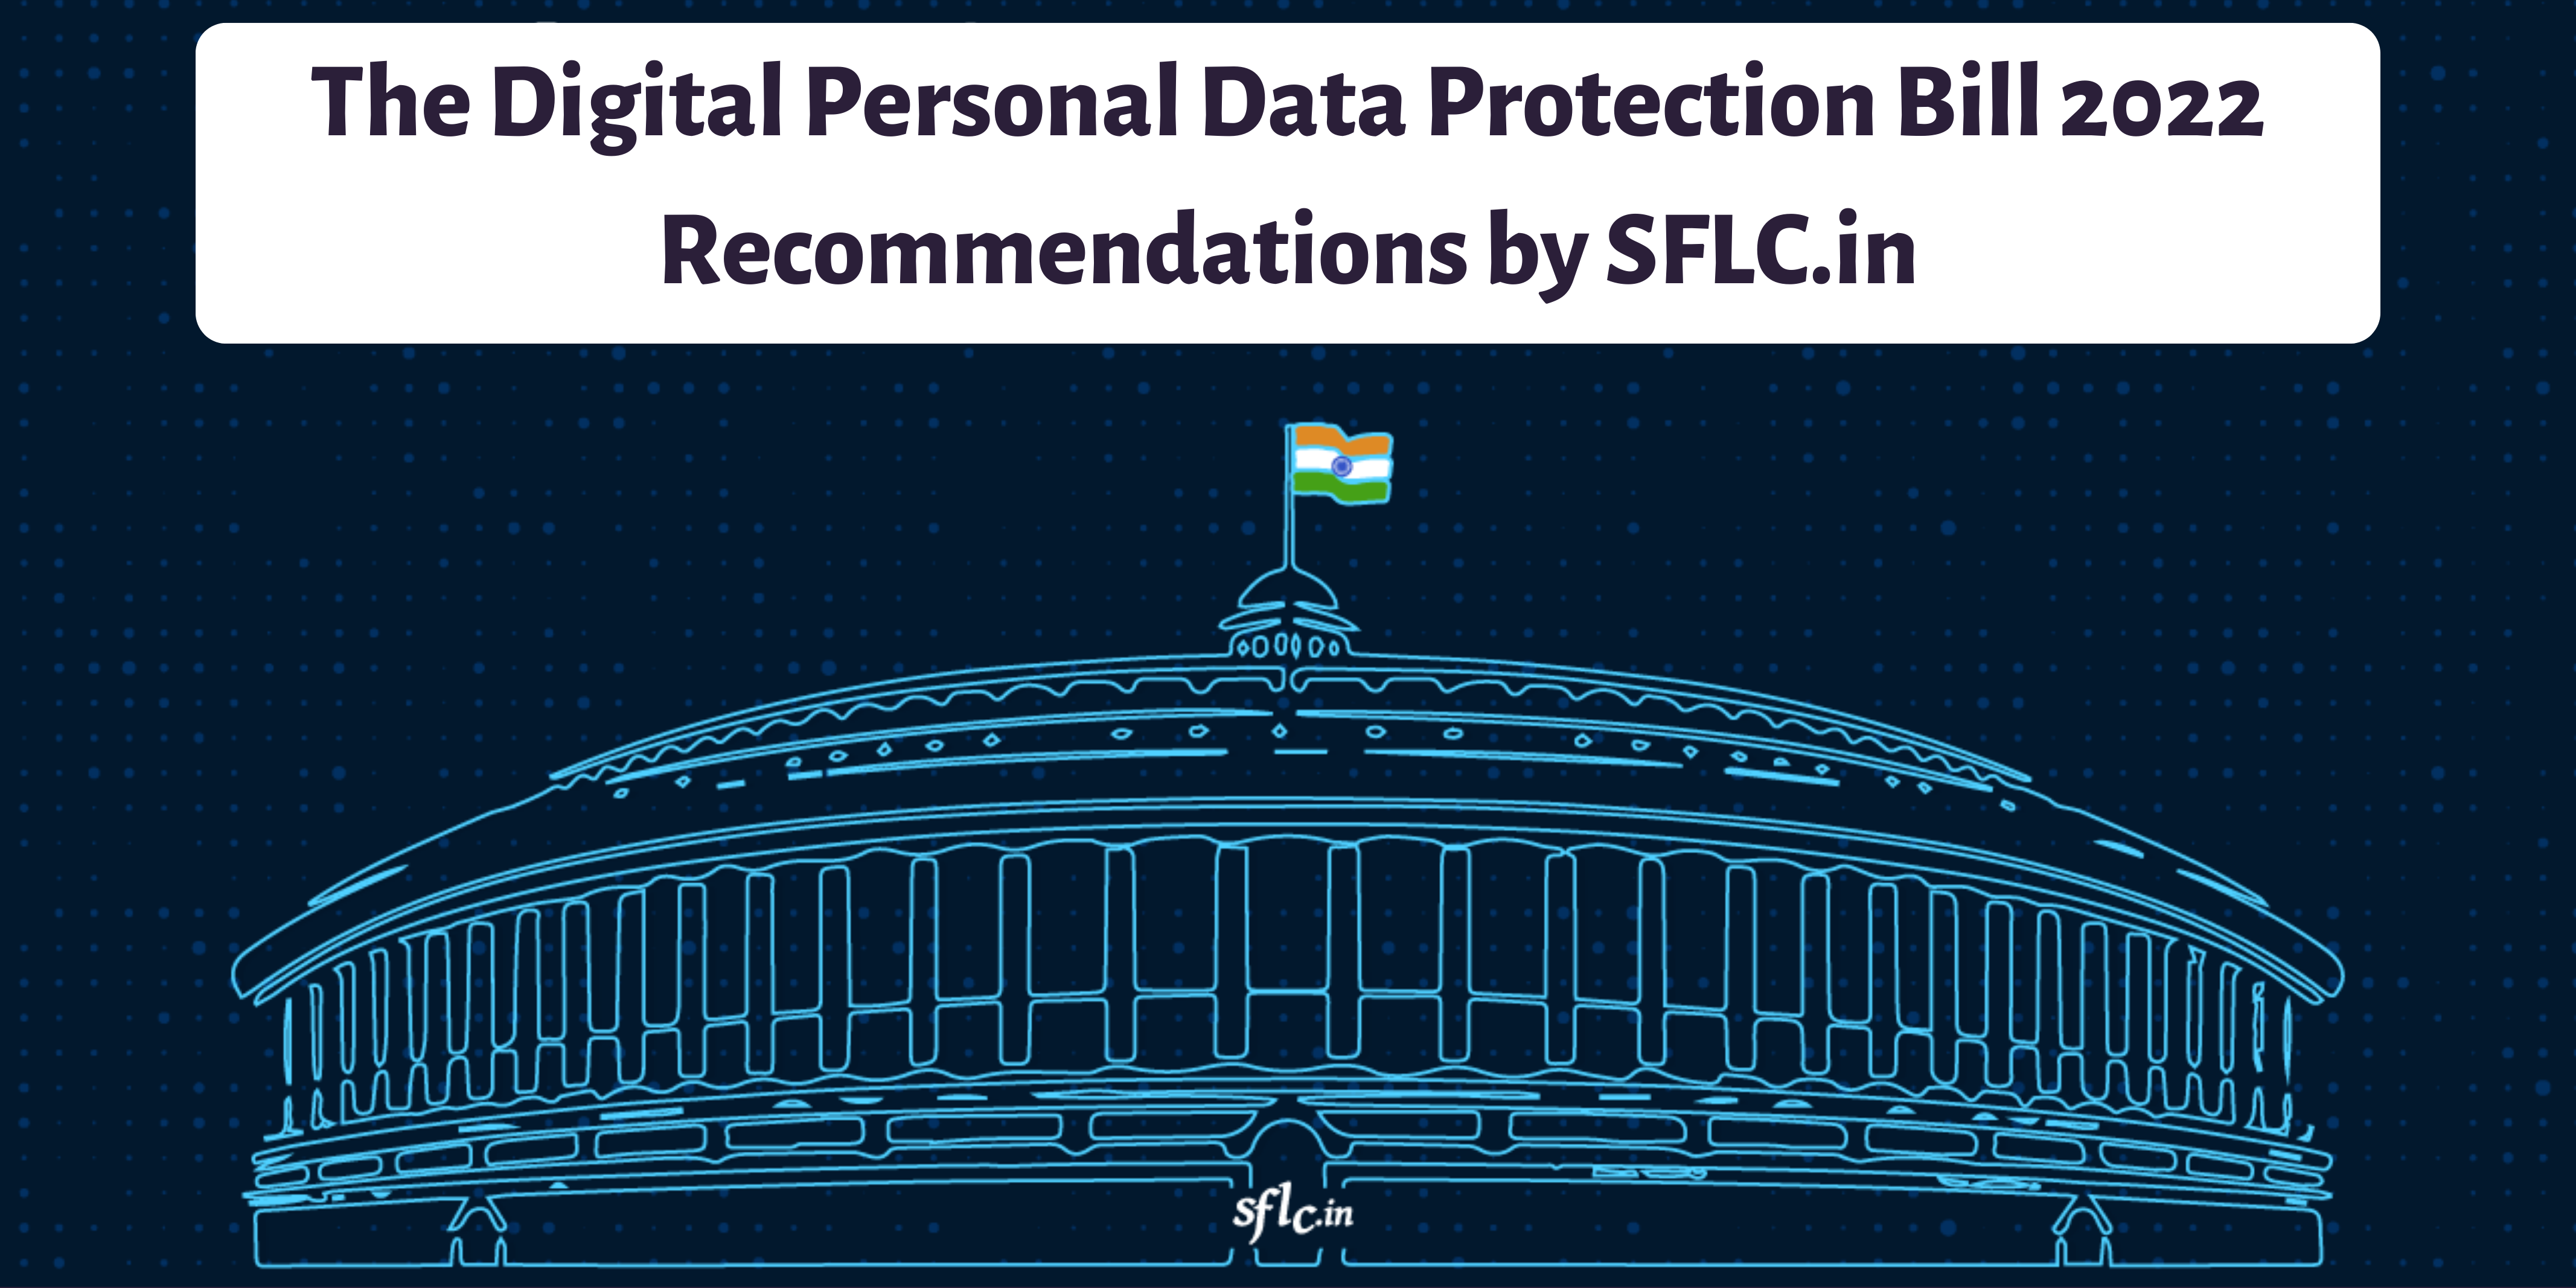 Recommendations by SFLC.in on the Digital Personal Data Protection Bill 2022 